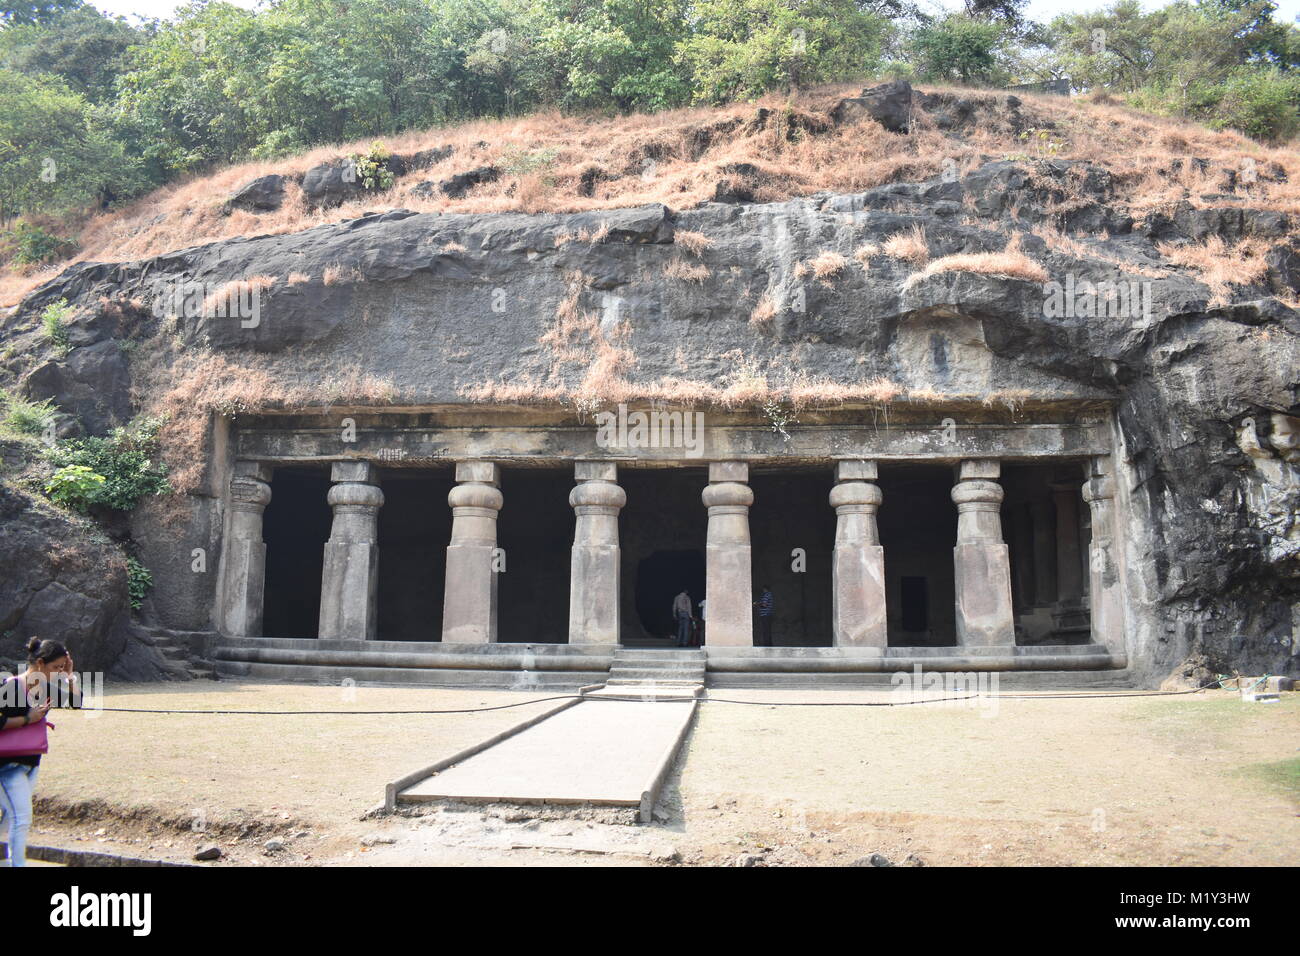 Elephanta caves close up view of looking awesome. Stock Photo